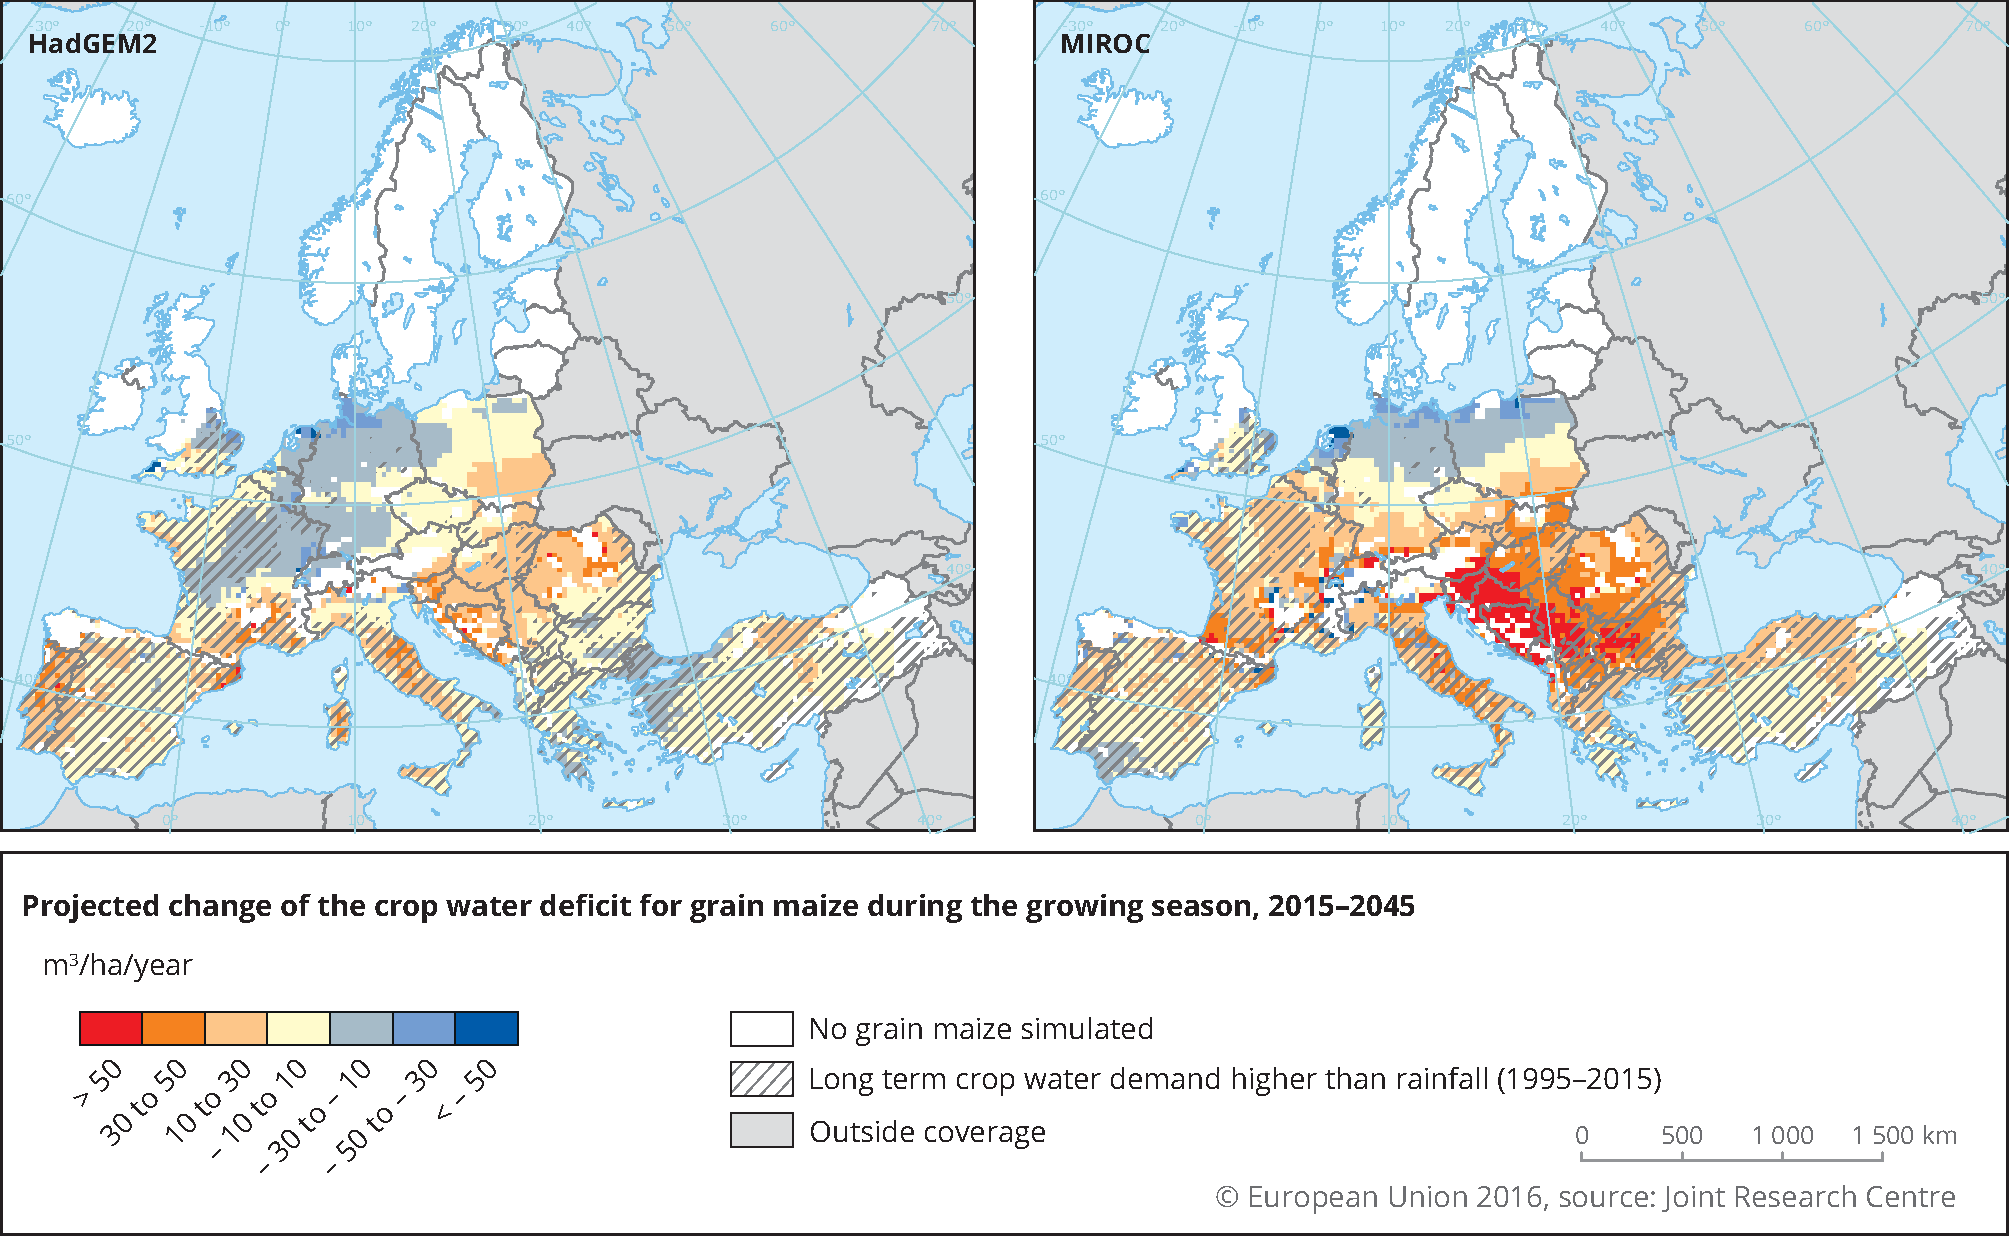 Projected annual rate of change of the crop water deficit of grain maize during the growing season in Europe for the period 2015-2045 for two climate scenarios. 